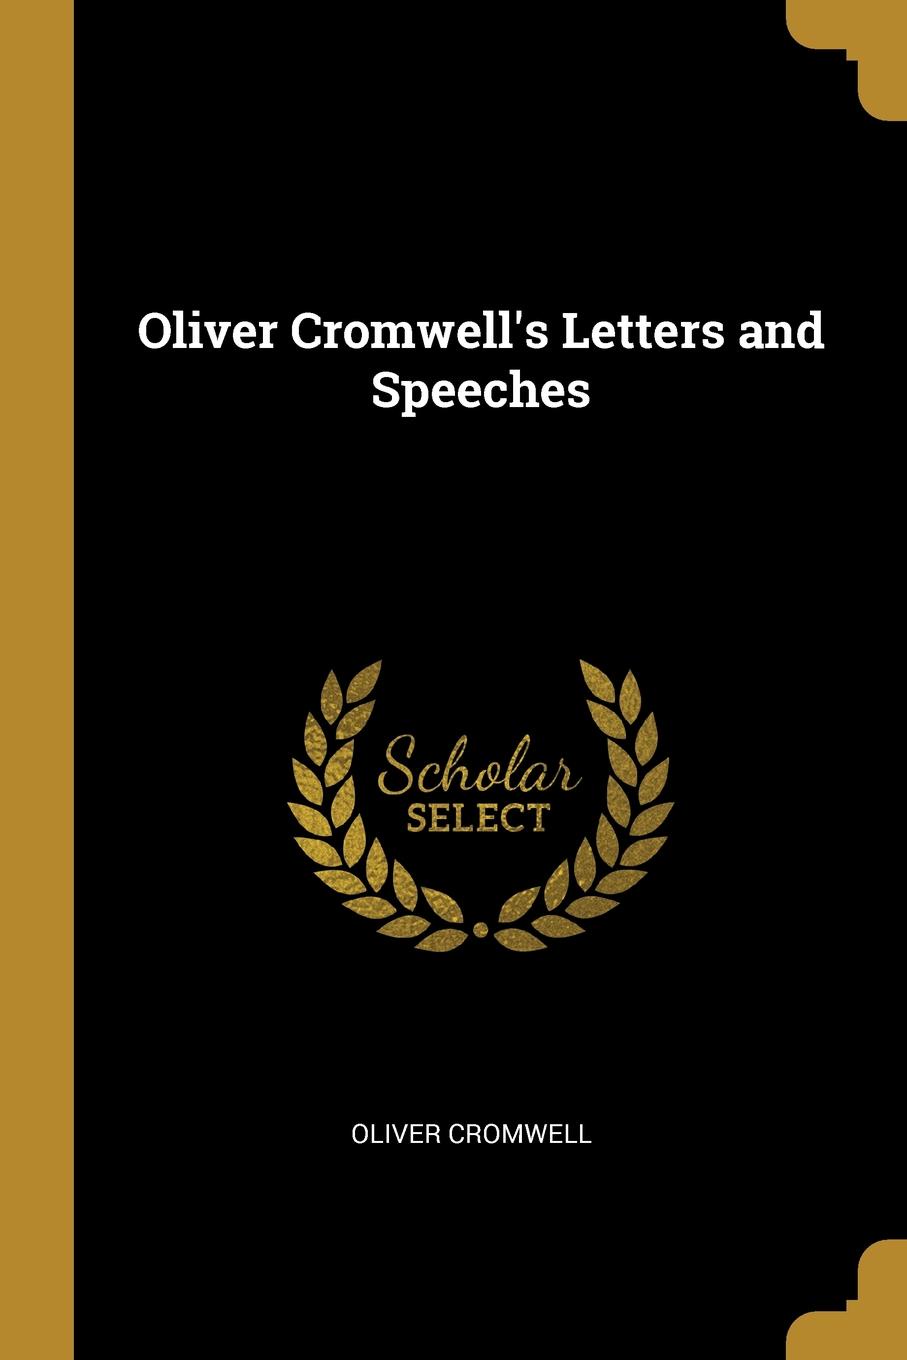 Oliver Cromwell.s Letters and Speeches